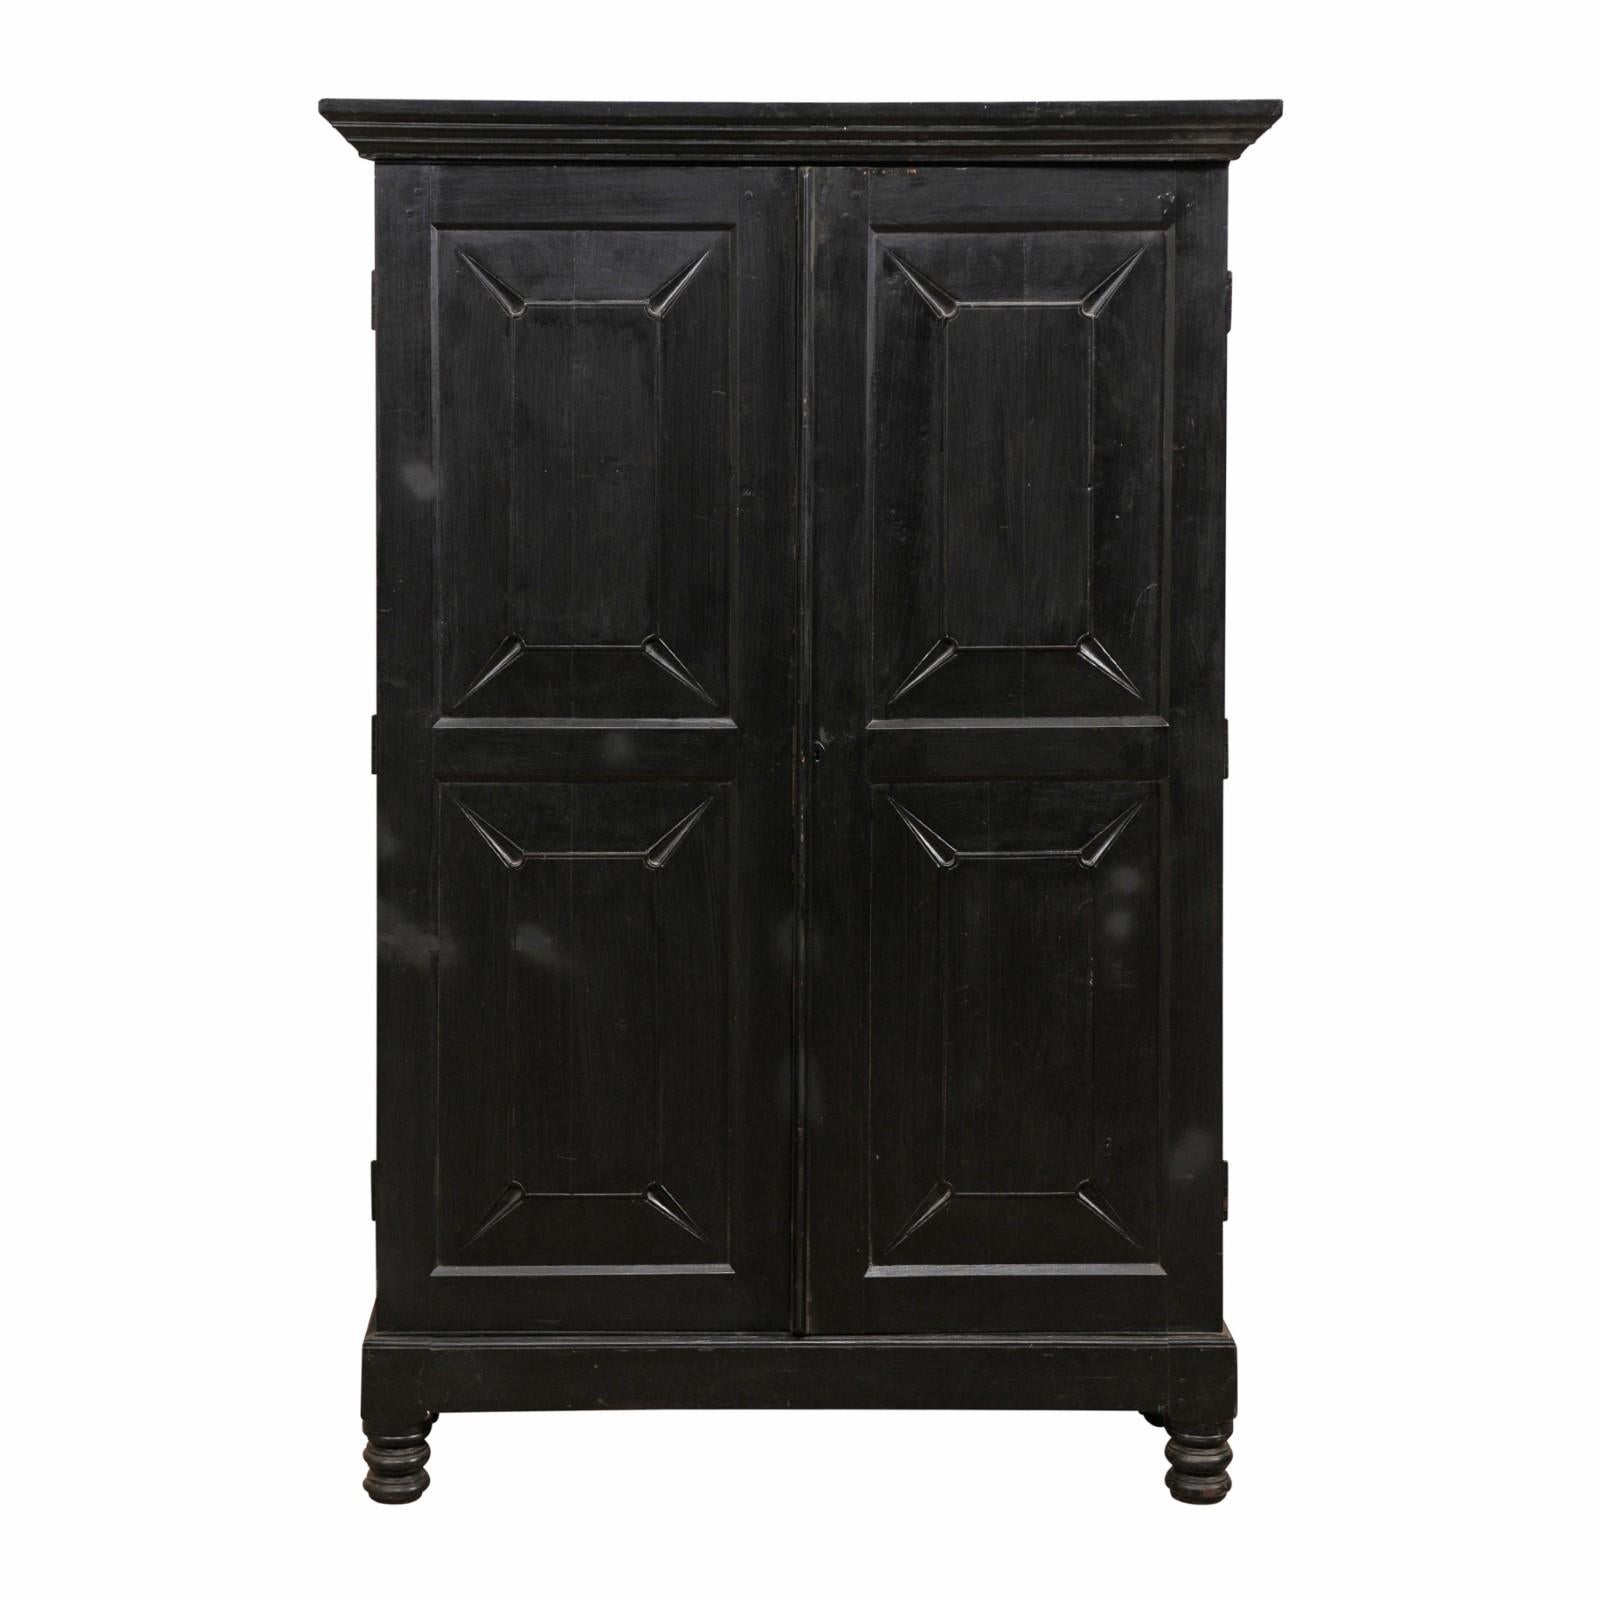 British Colonial Cabinet from the Mid-20th Century in Rich Black Color